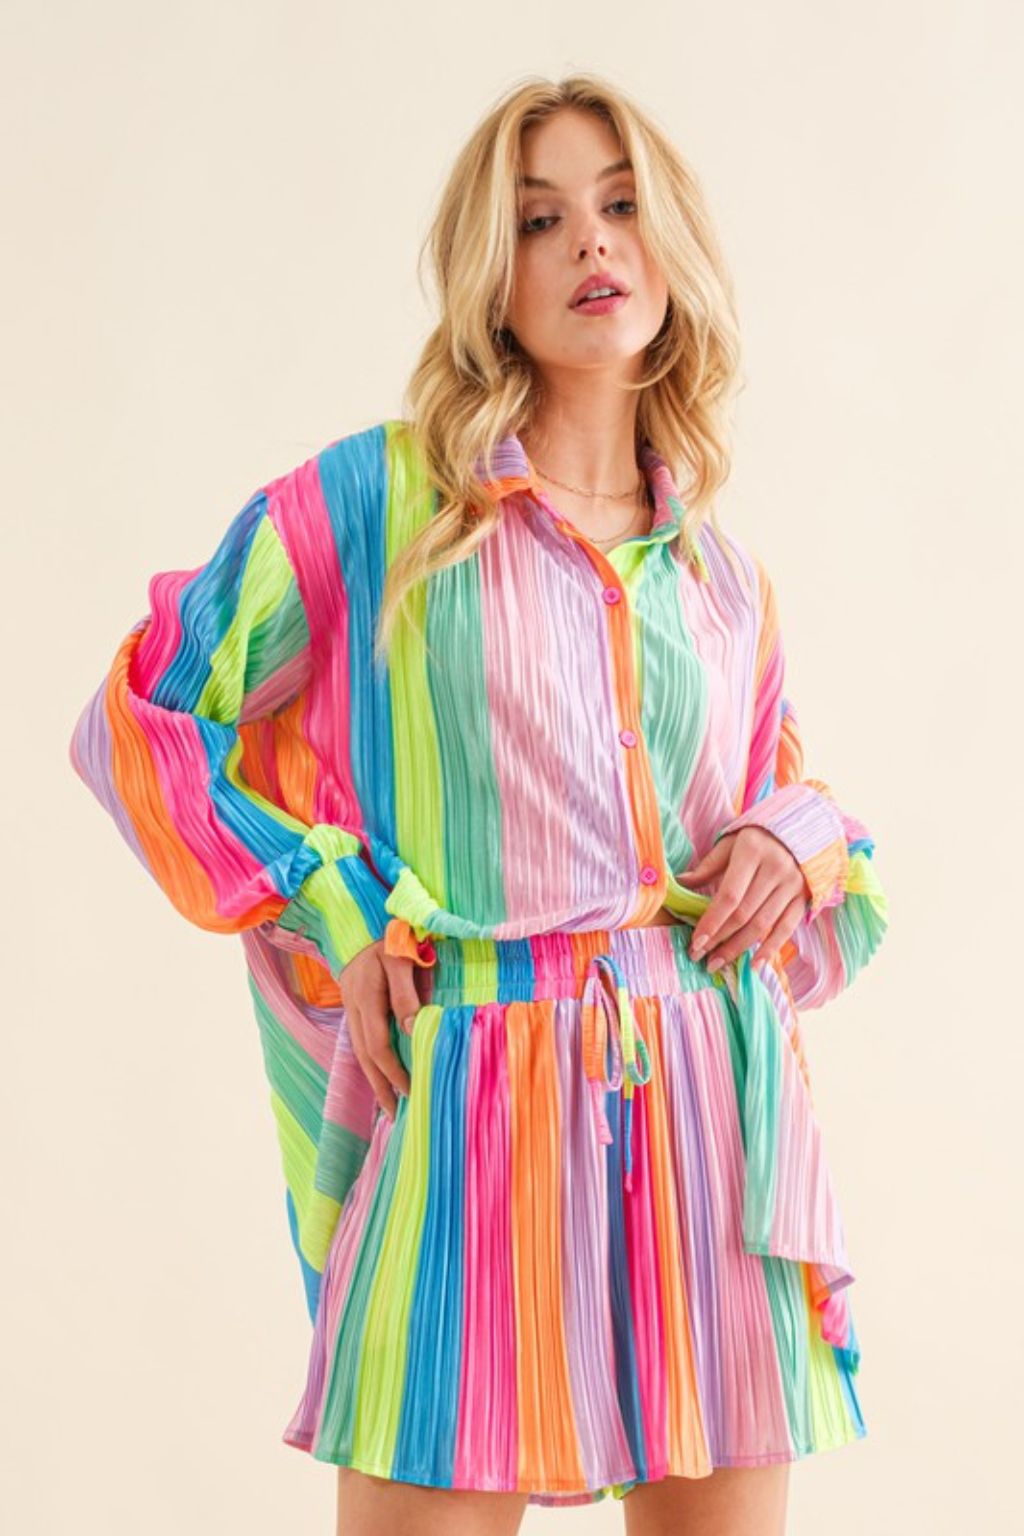 Pleated Rainbow Shirt with Matching Shorts